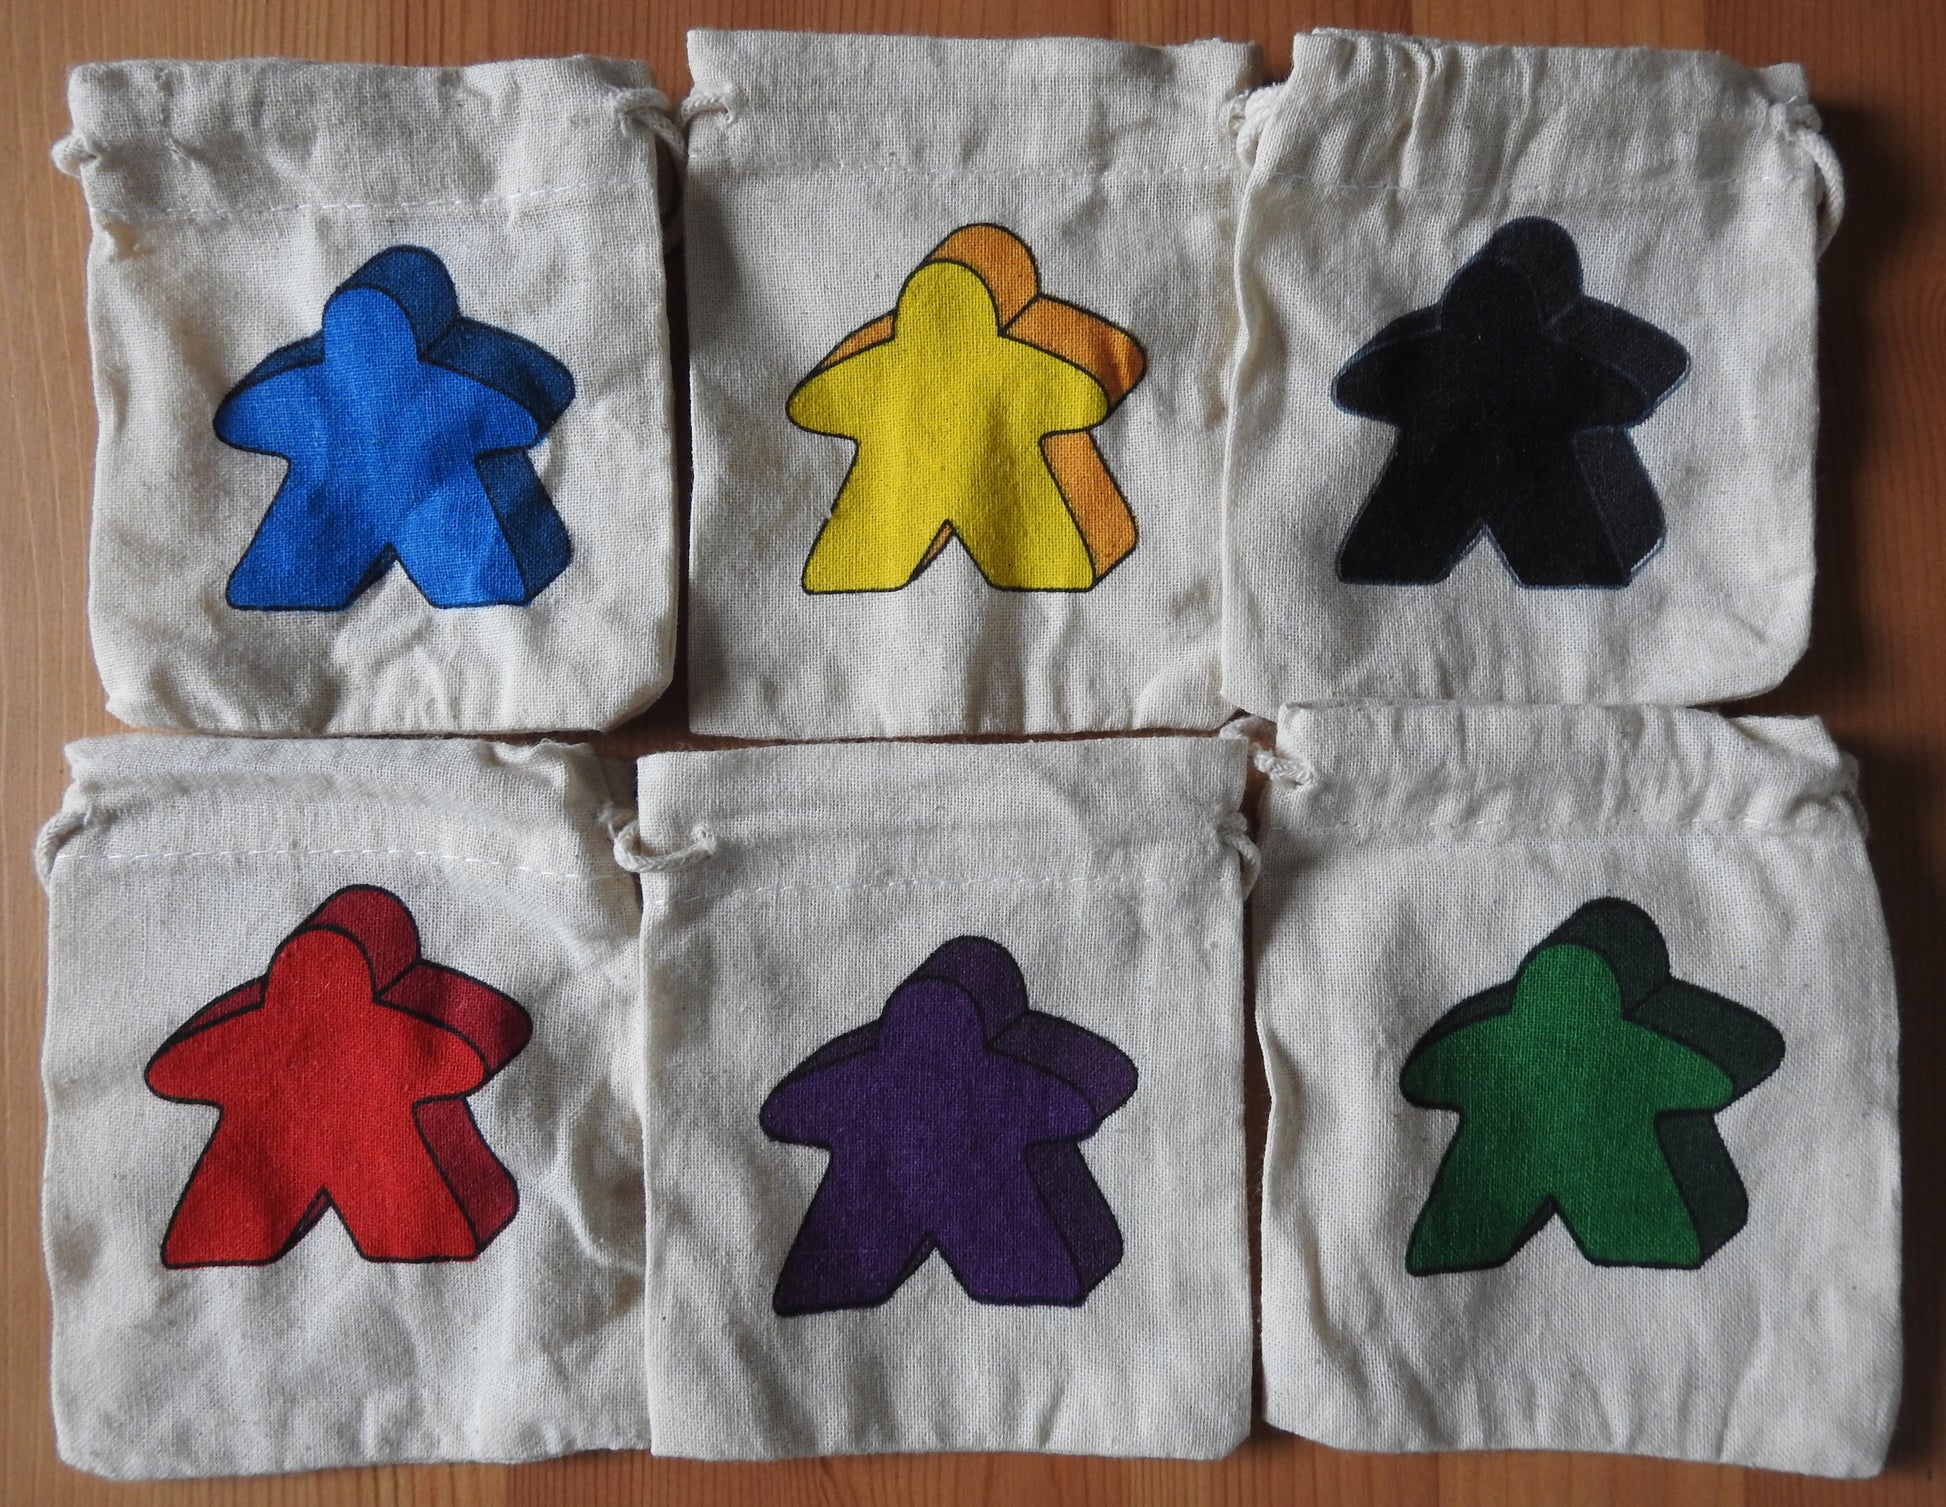 View of all 6 of the meeple bags that are included.